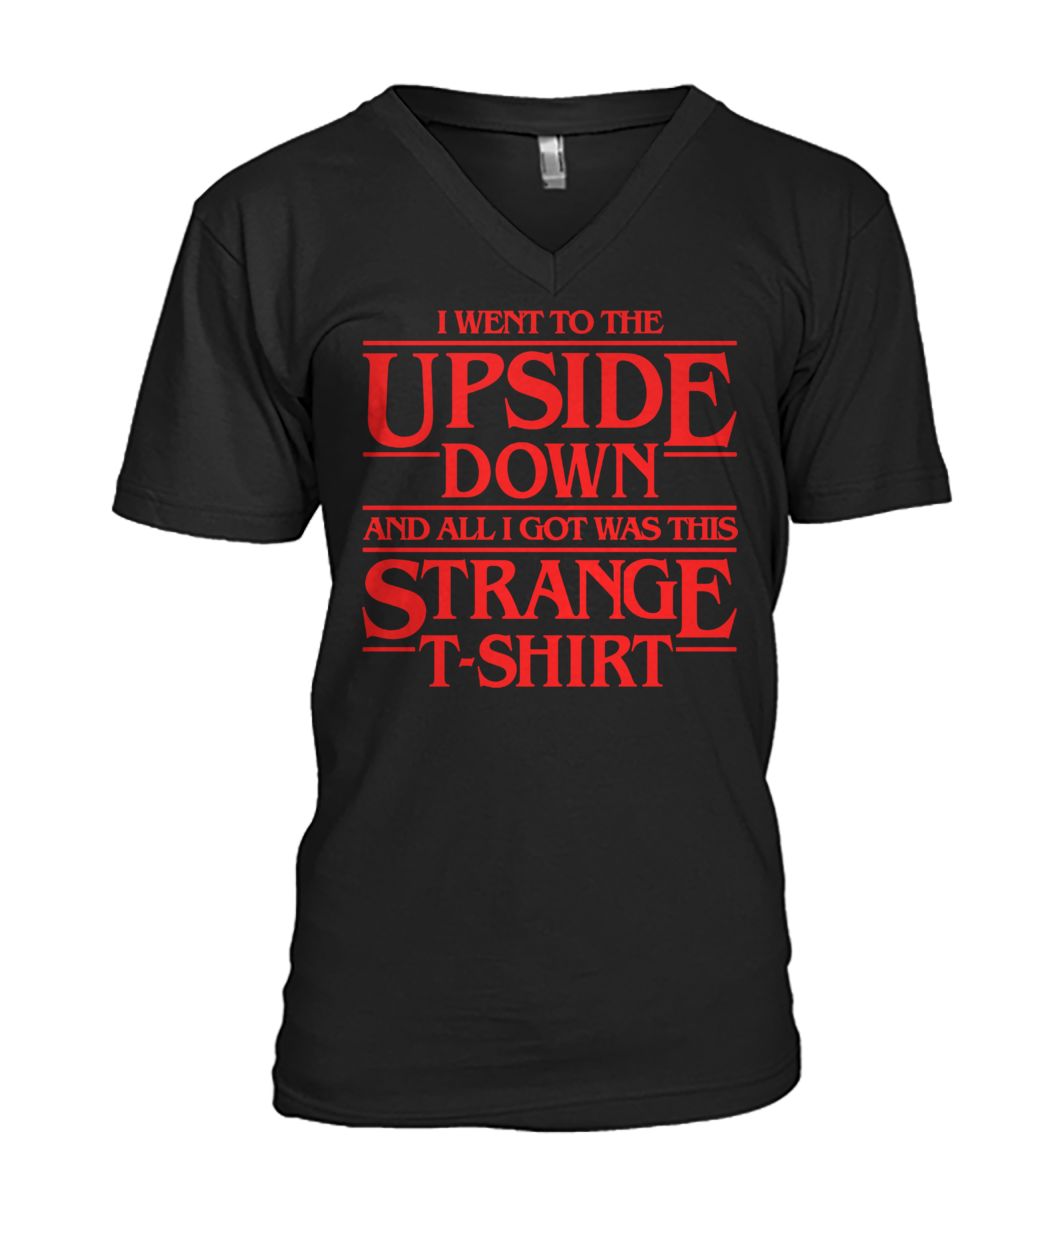 I went to the upside down and all i got was this strange t-shirt mens v-neck